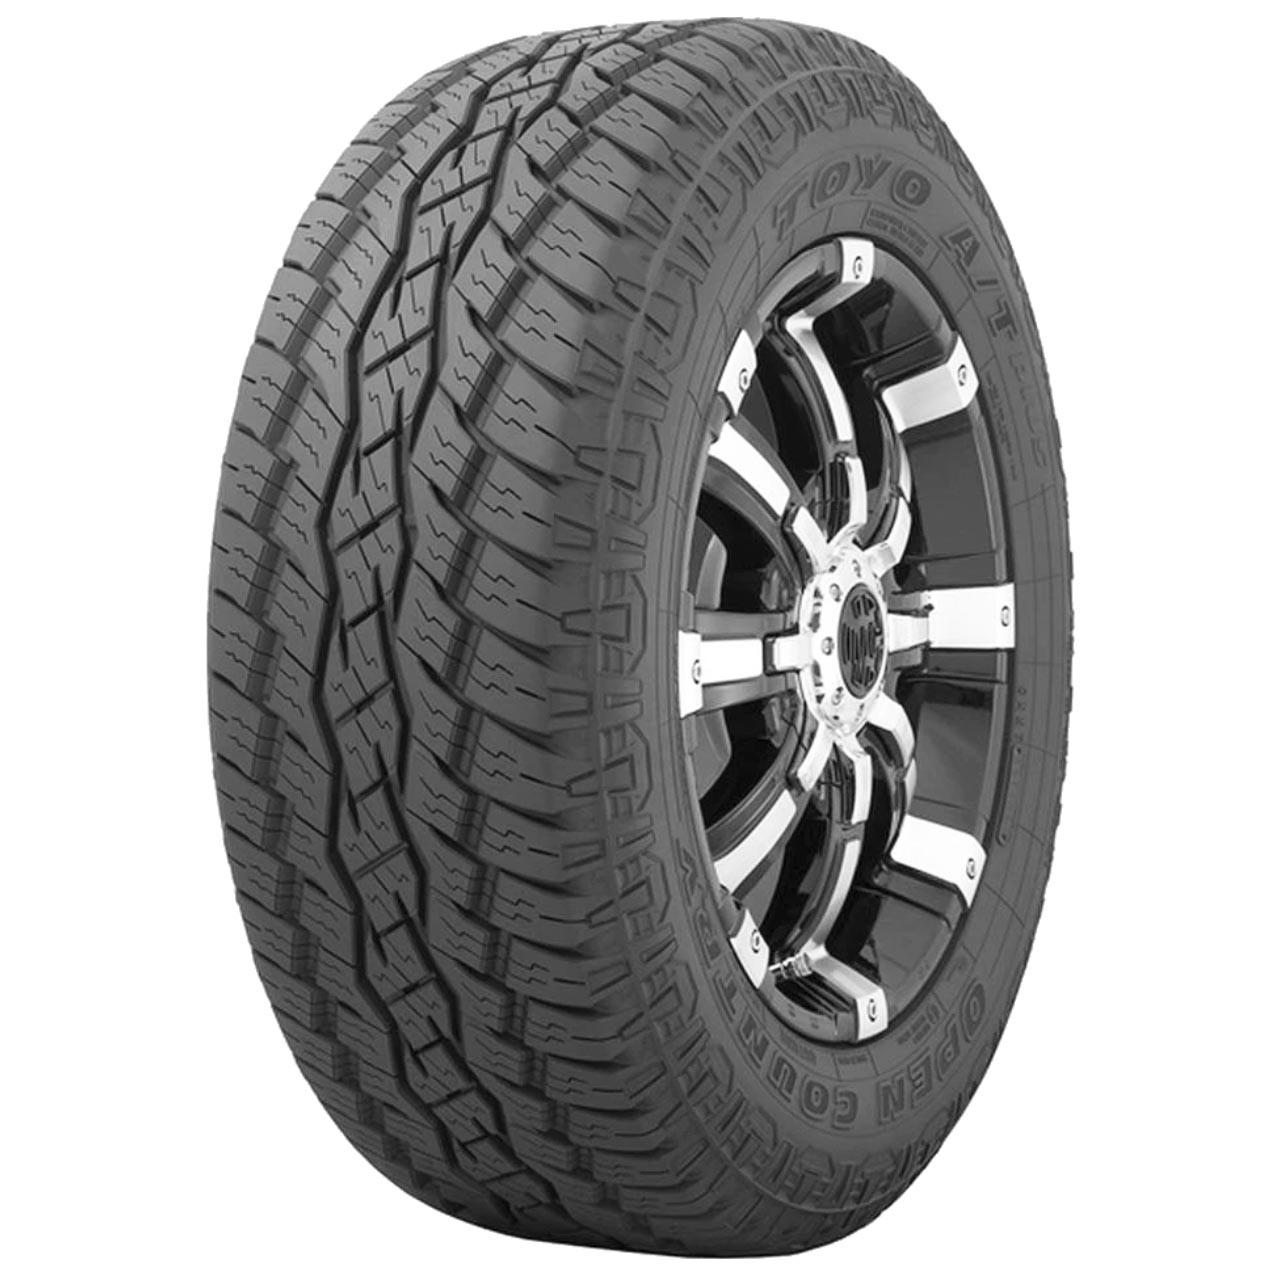 Toyo Open Country AT Plus 235/65R17 108V XL